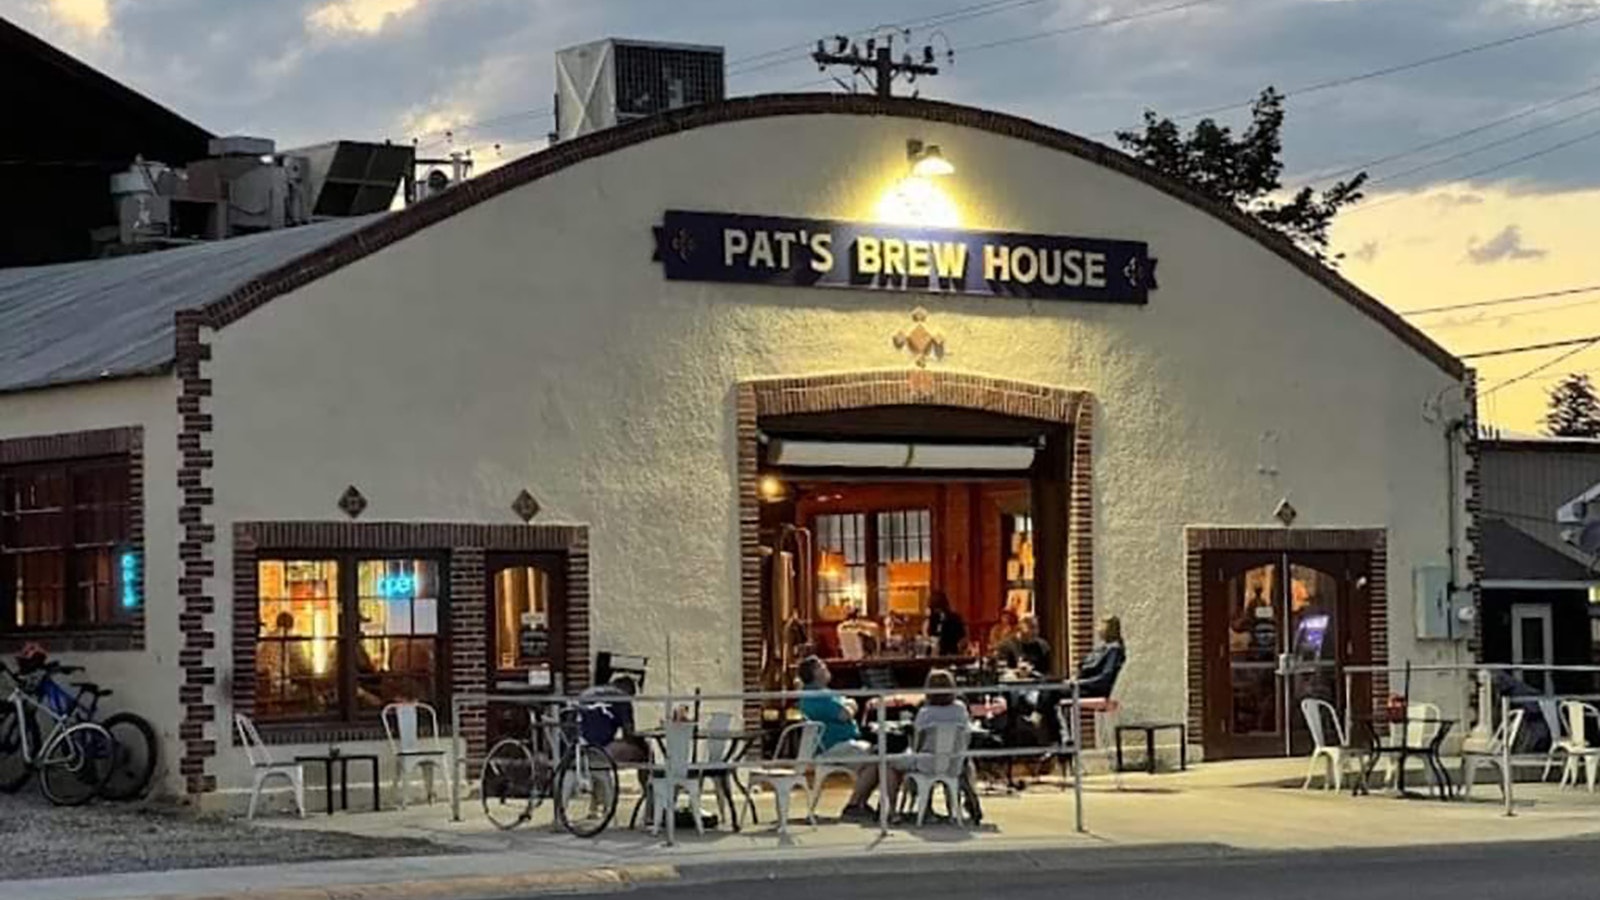 Pat's Brew House is located just off main street in Cody in a building that was built in 1917 as a car garage.